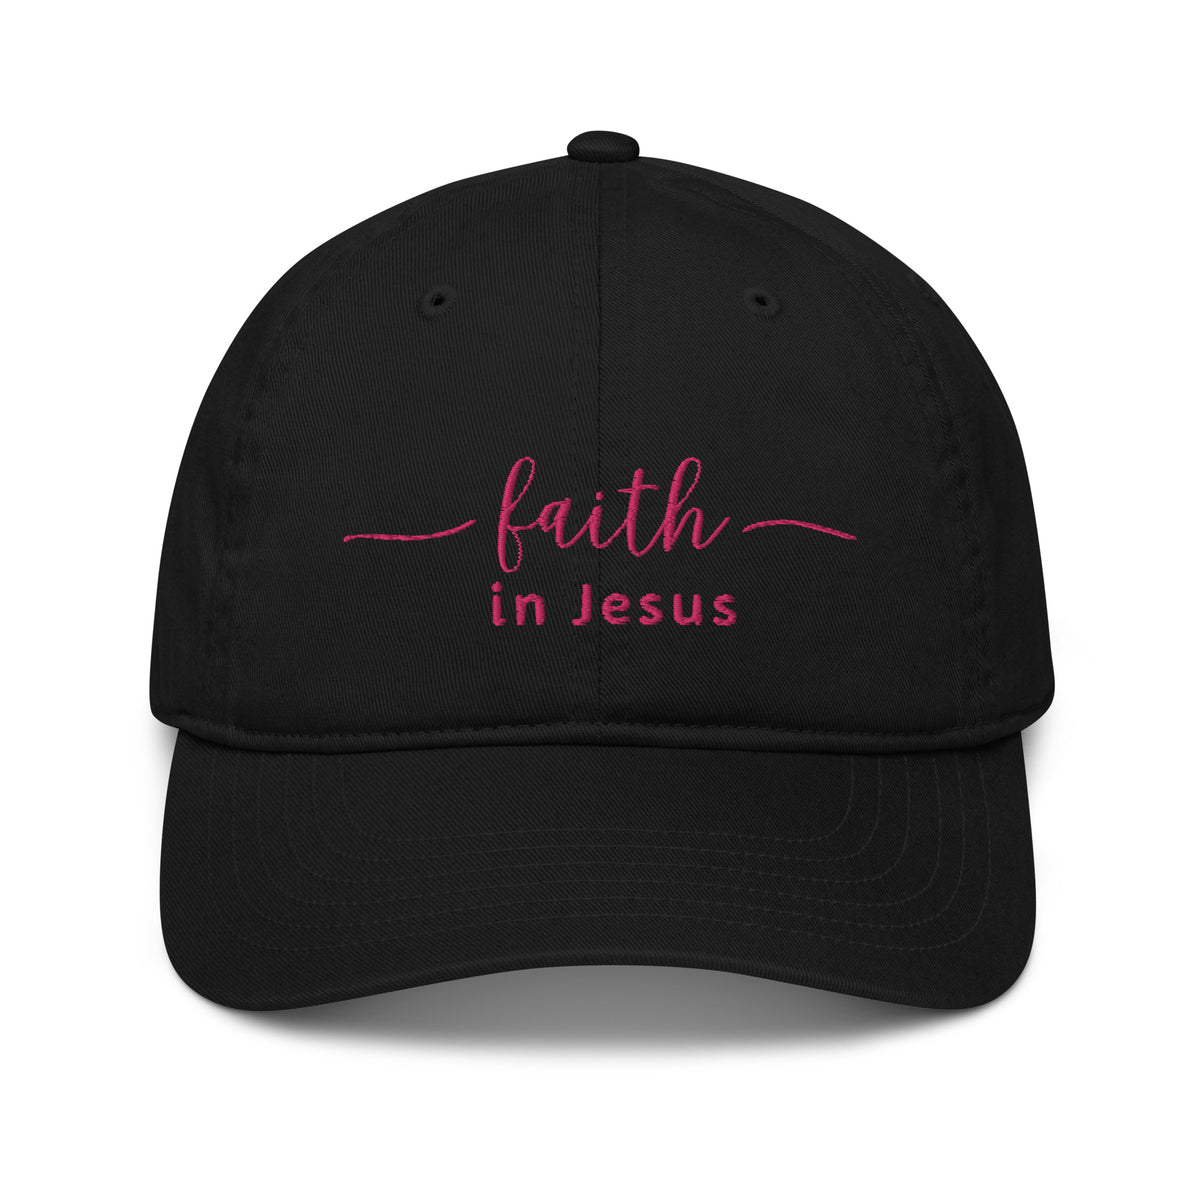 FAITH in Jesus cap - 5 colors available